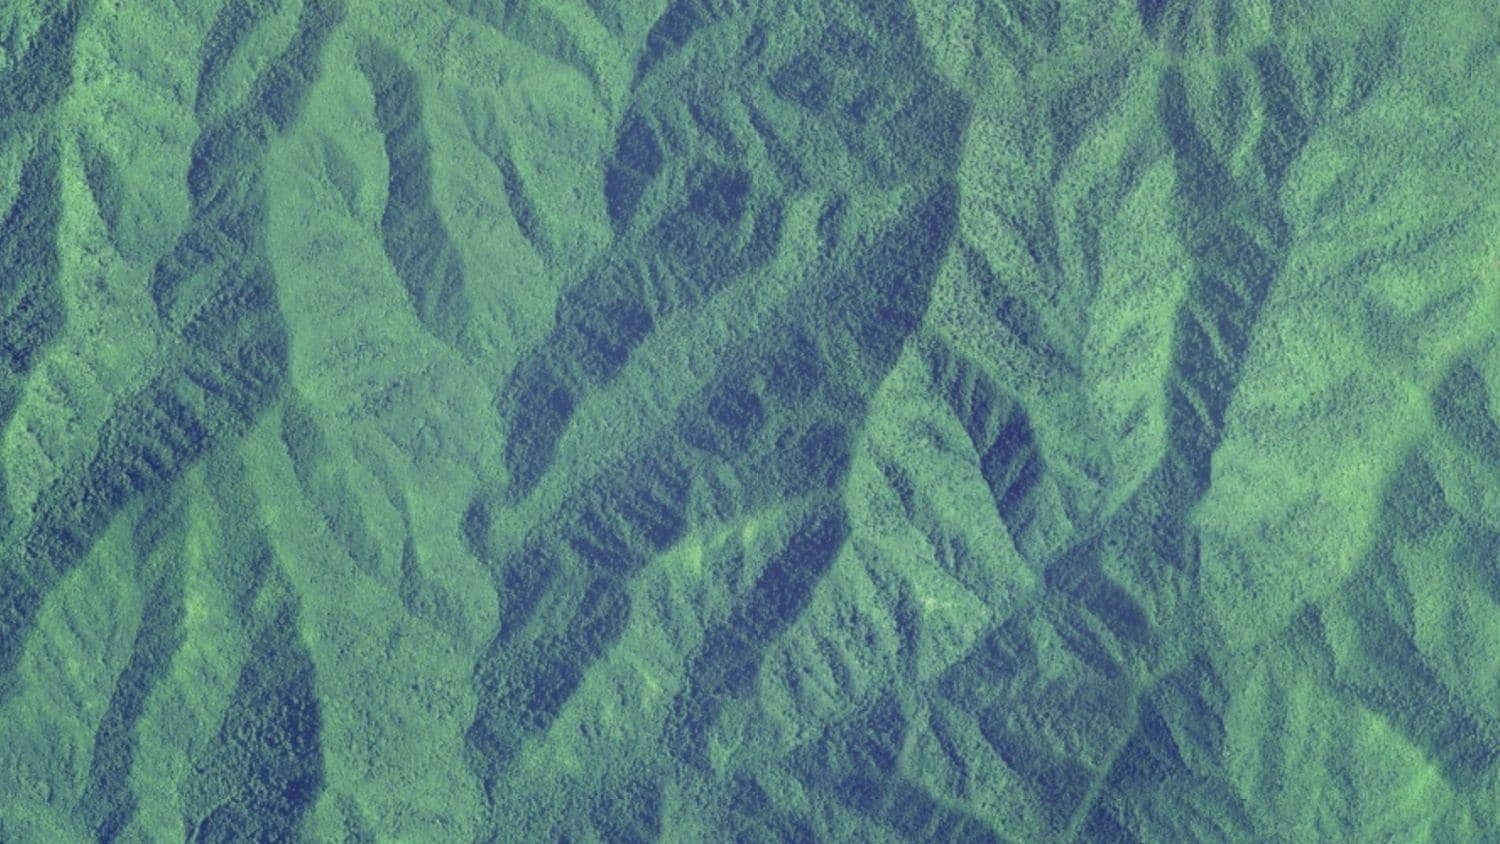 Aerial of forests in Great Smoky Mountains - Center for Geospatial Analytics at NC State University